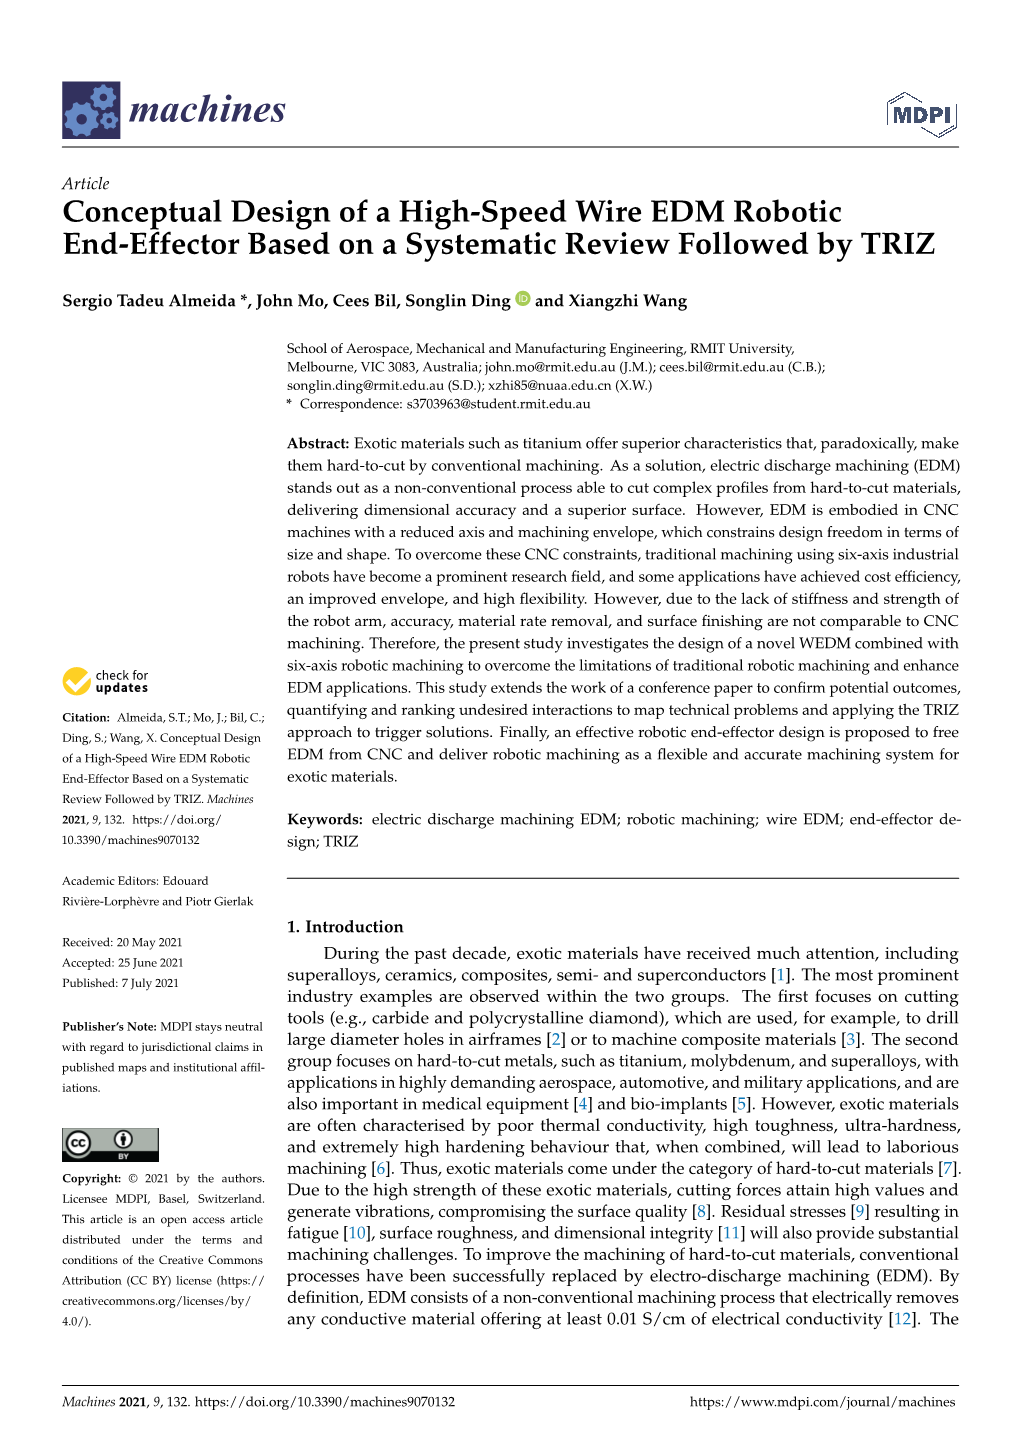 Conceptual Design of a High-Speed Wire EDM Robotic End-Effector Based on a Systematic Review Followed by TRIZ